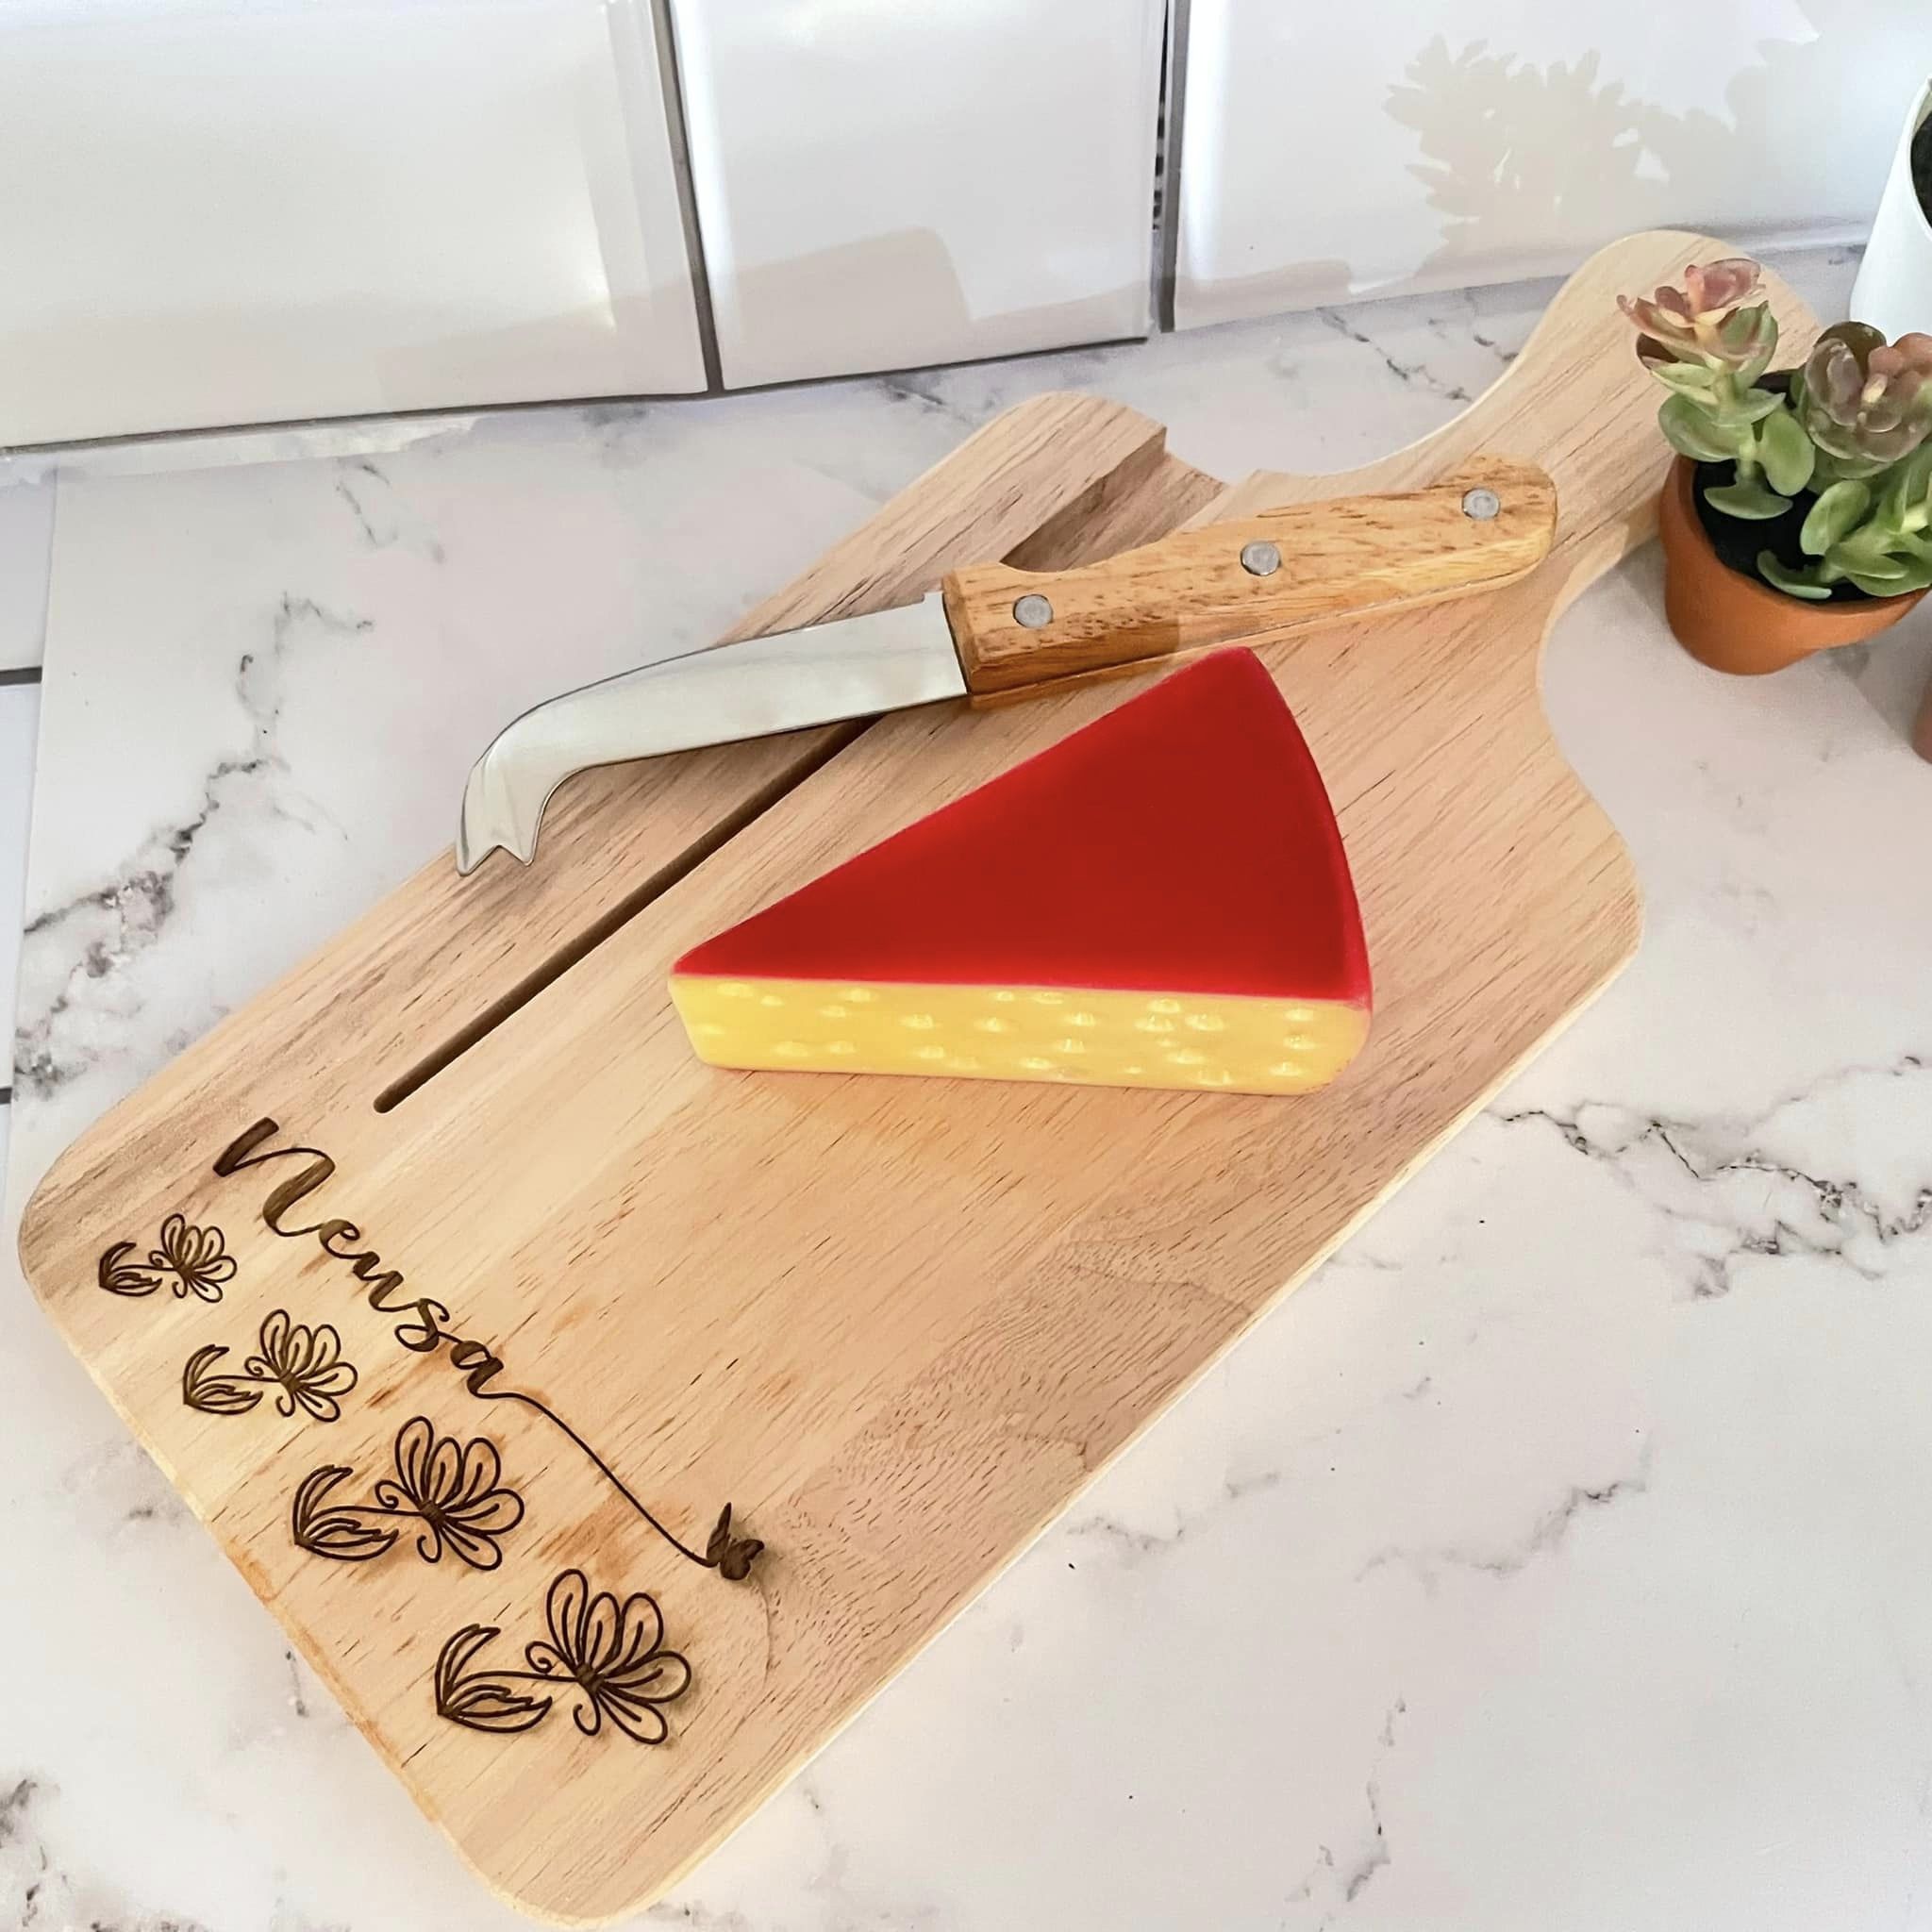 Small Wooden Cutting Board with Knife